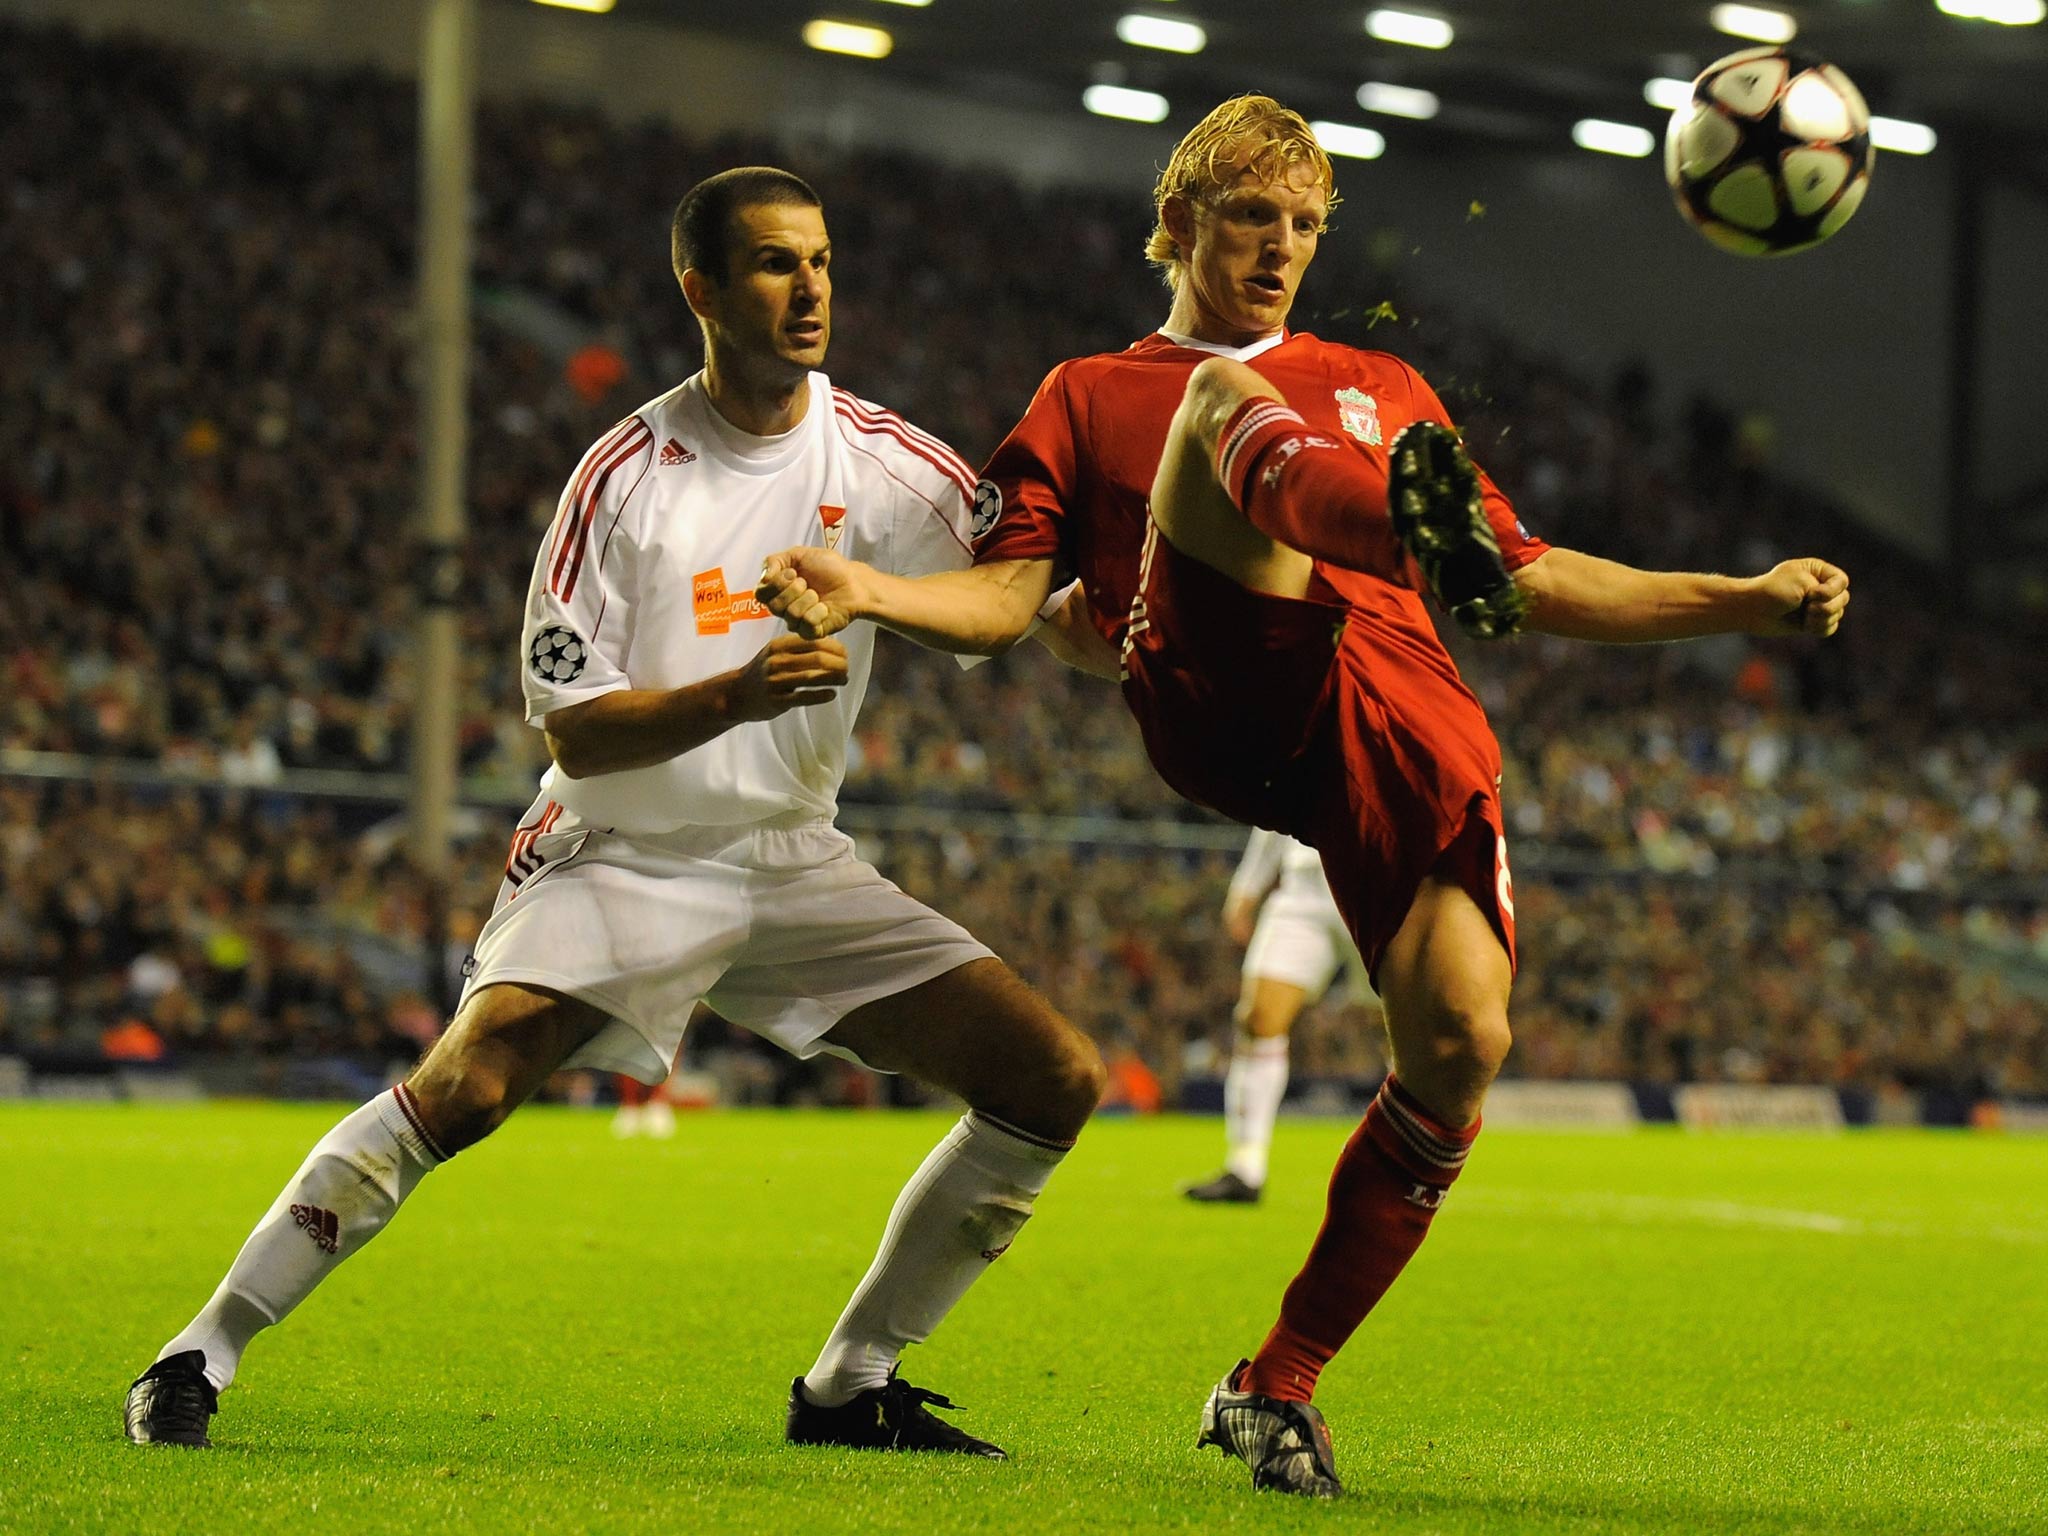 Dirk Kuyt scored the only goal of the match during Liverpool's Champions League match against Debrecen in 2009